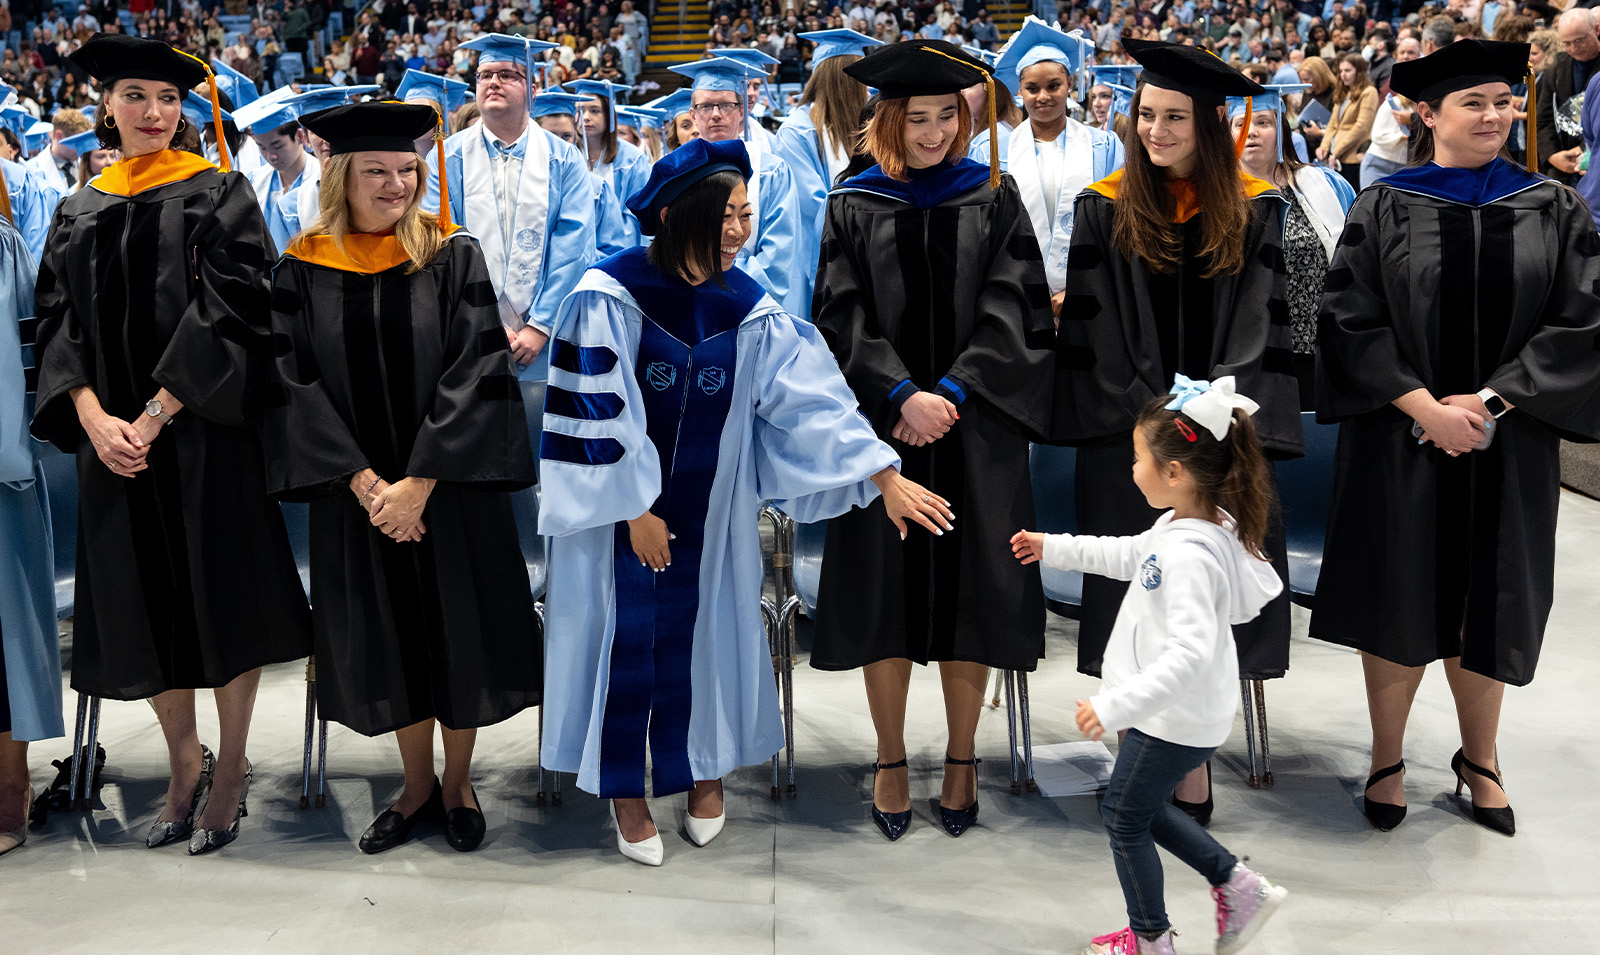 A young girl giving a faculty member a fist bump at Winter Commencement.